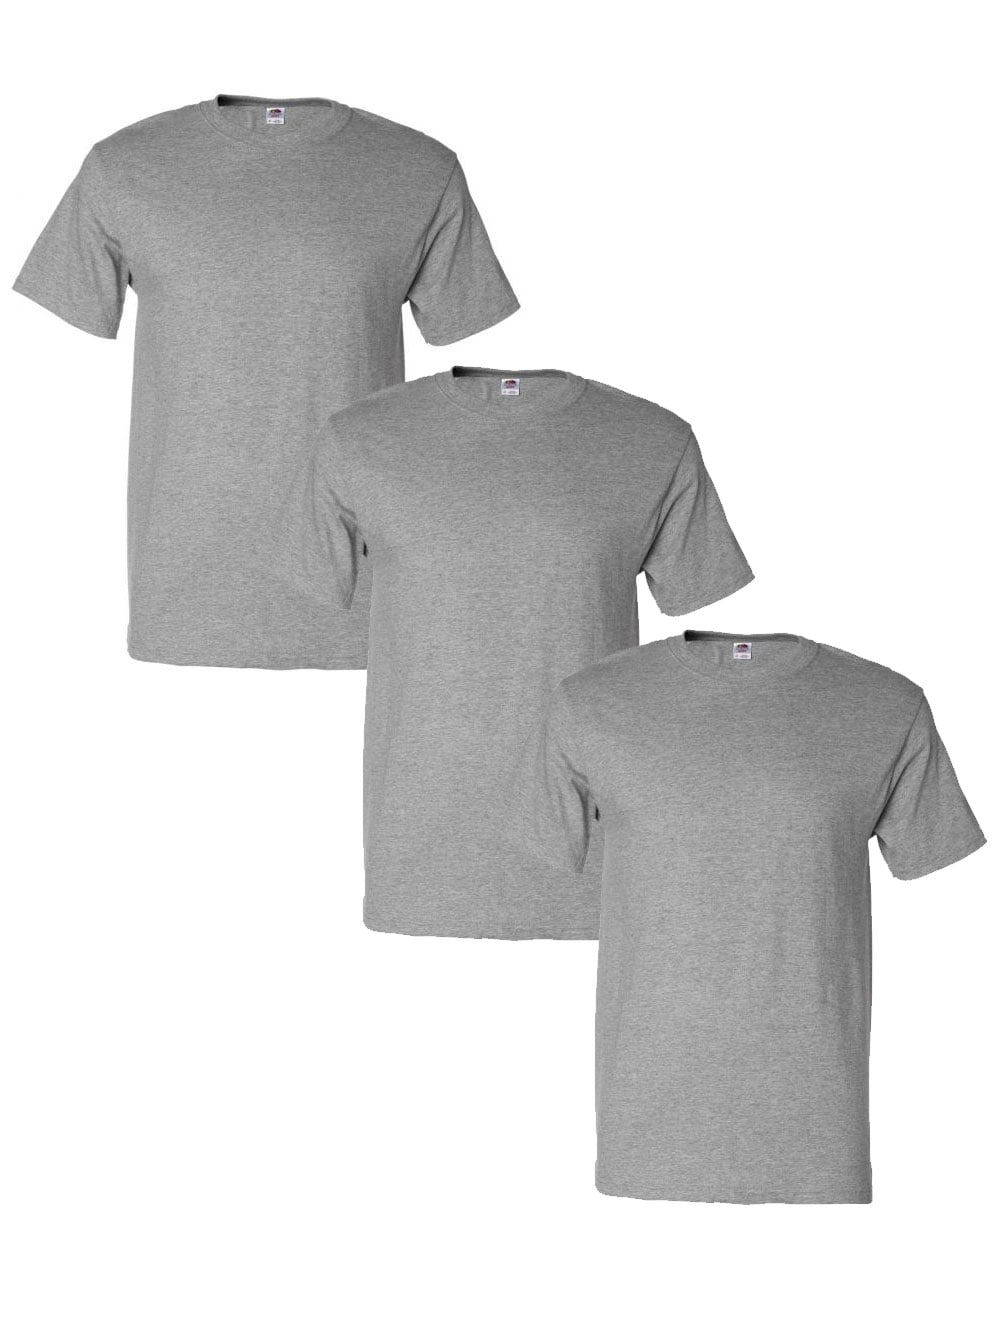 3 HEAVY COTTON FRUIT OF THE LOOM WHITE T-SHIRTS S-XXL